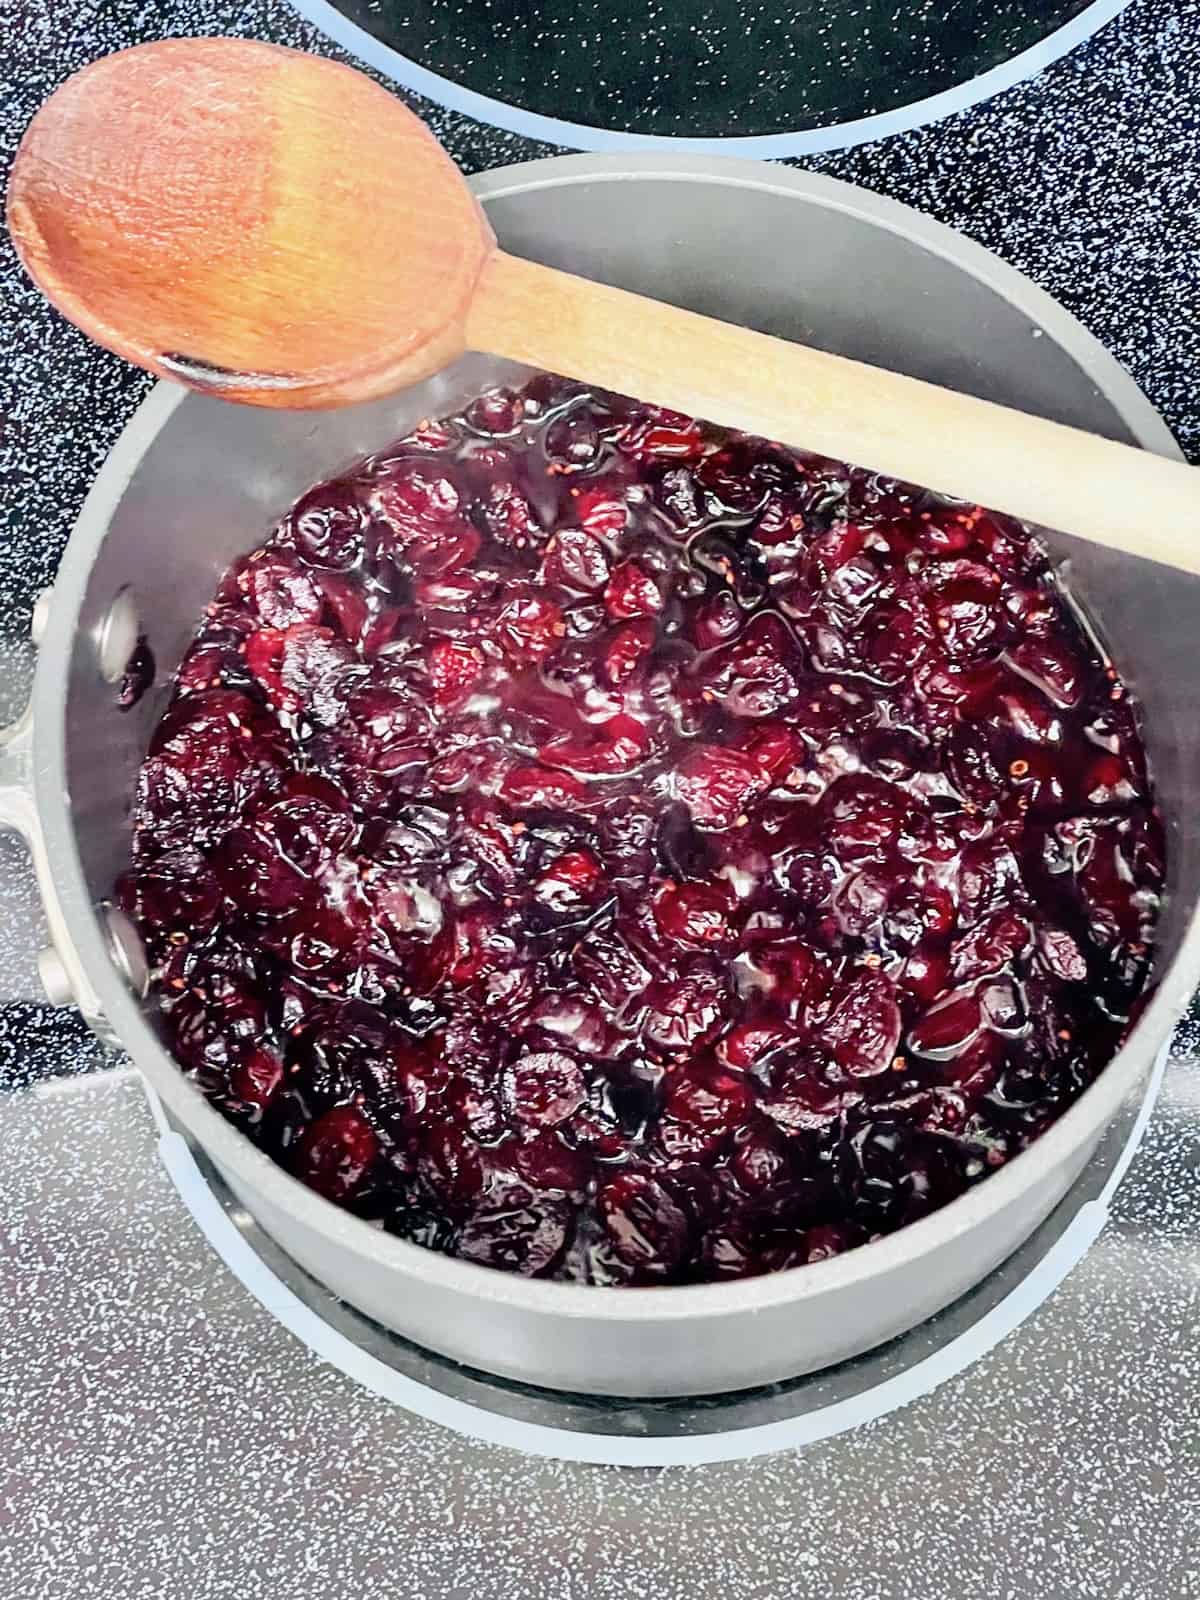 Ingredients in a pot to cook the dried cranberries into cranberry sauce.